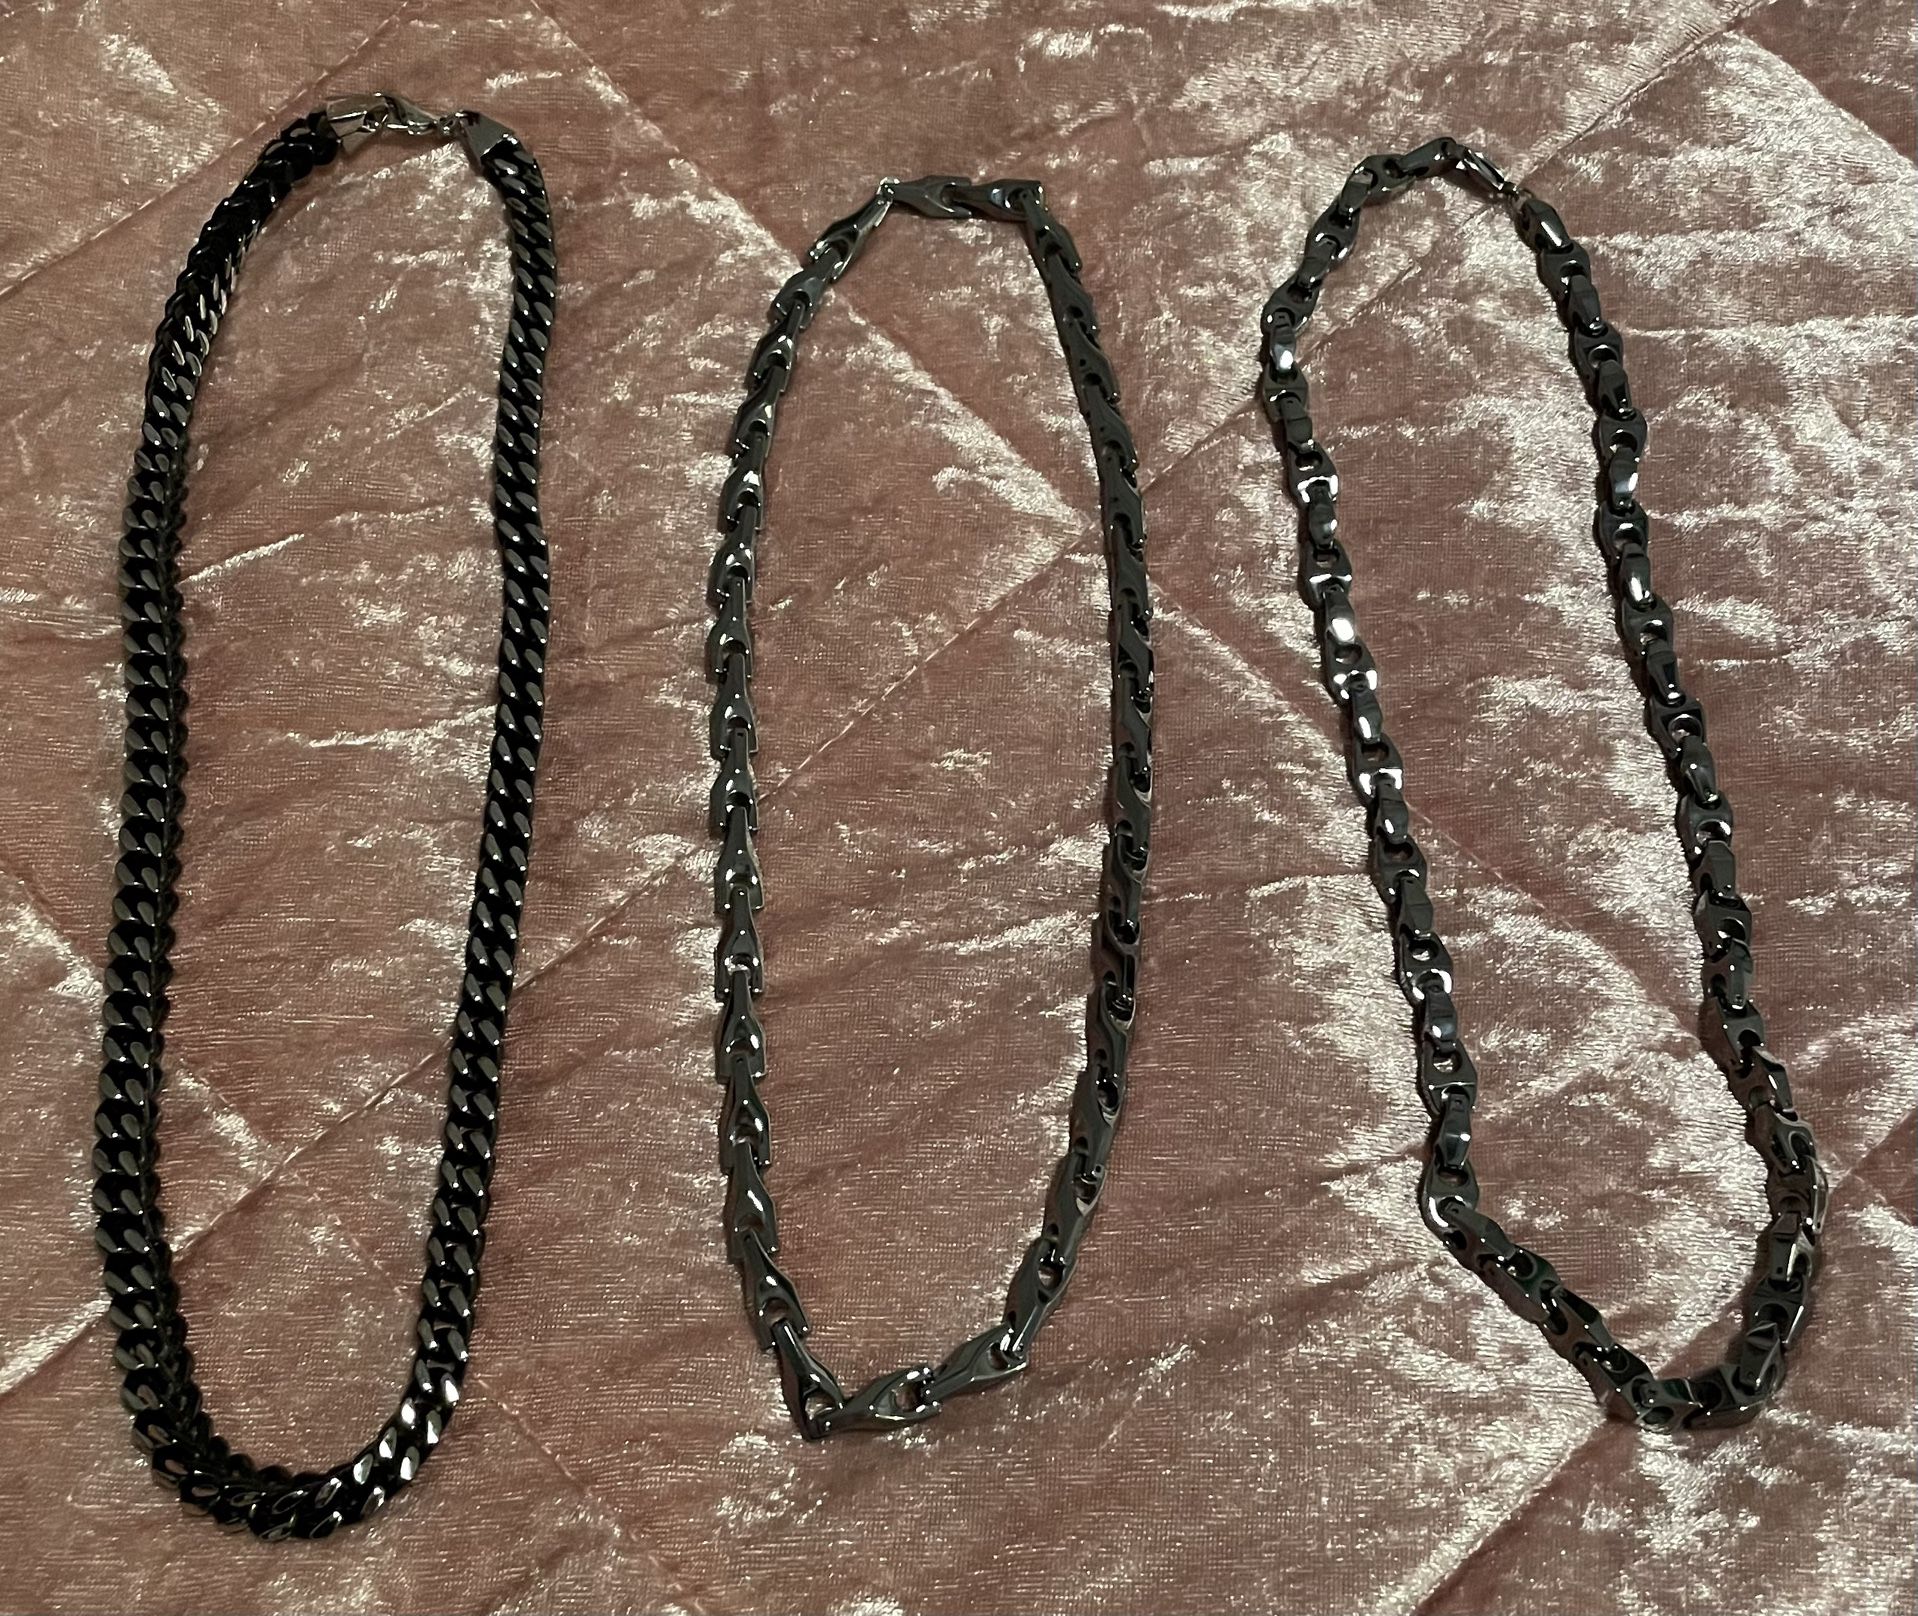 2 Silver 22”Tungsten Chains & 1 Black 24” StainlessSteal Chain (priced separately)